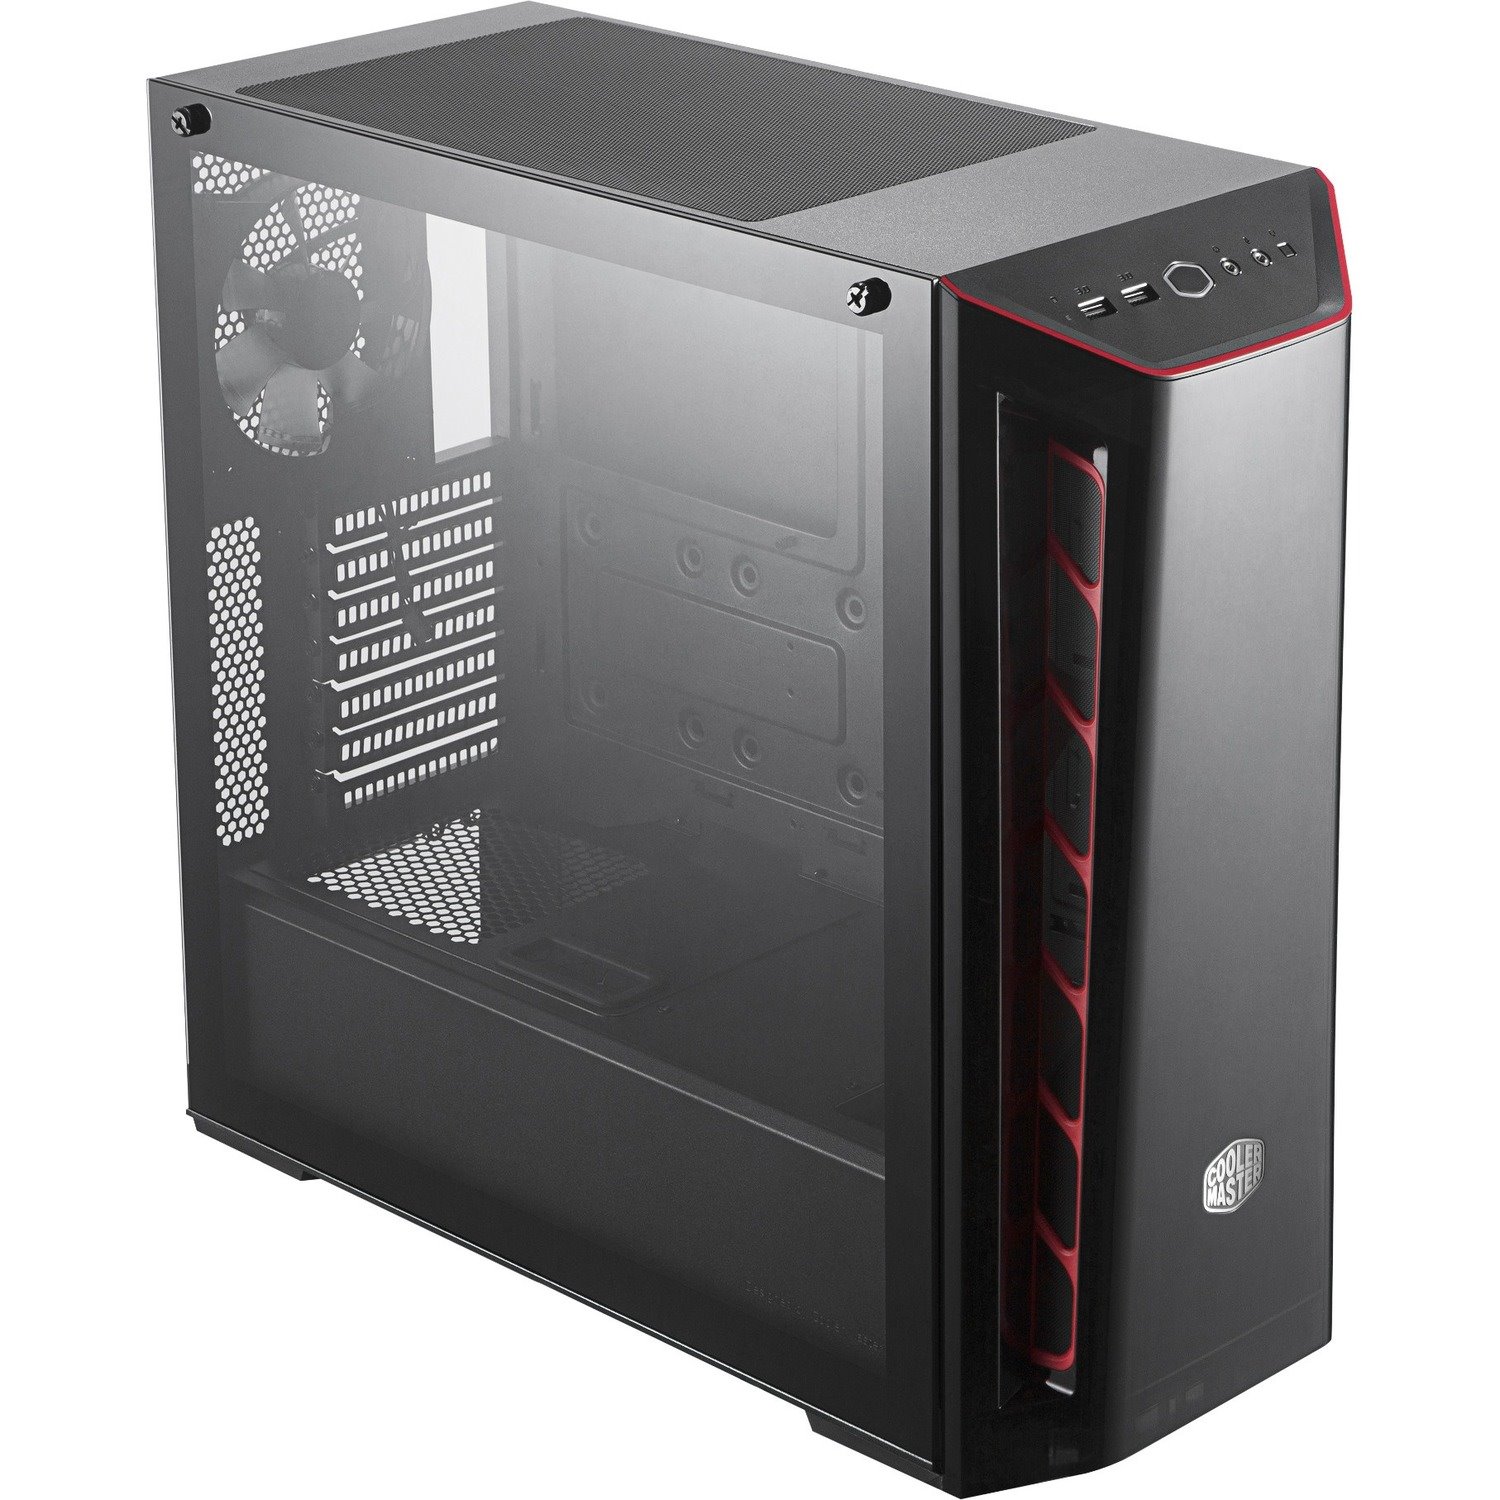 Cooler Master MasterBox MB520 TG Computer Case - ATX, Micro ATX, Mini ITX Motherboard Supported - Mid-tower - Steel, Plastic, Tempered Glass - Red